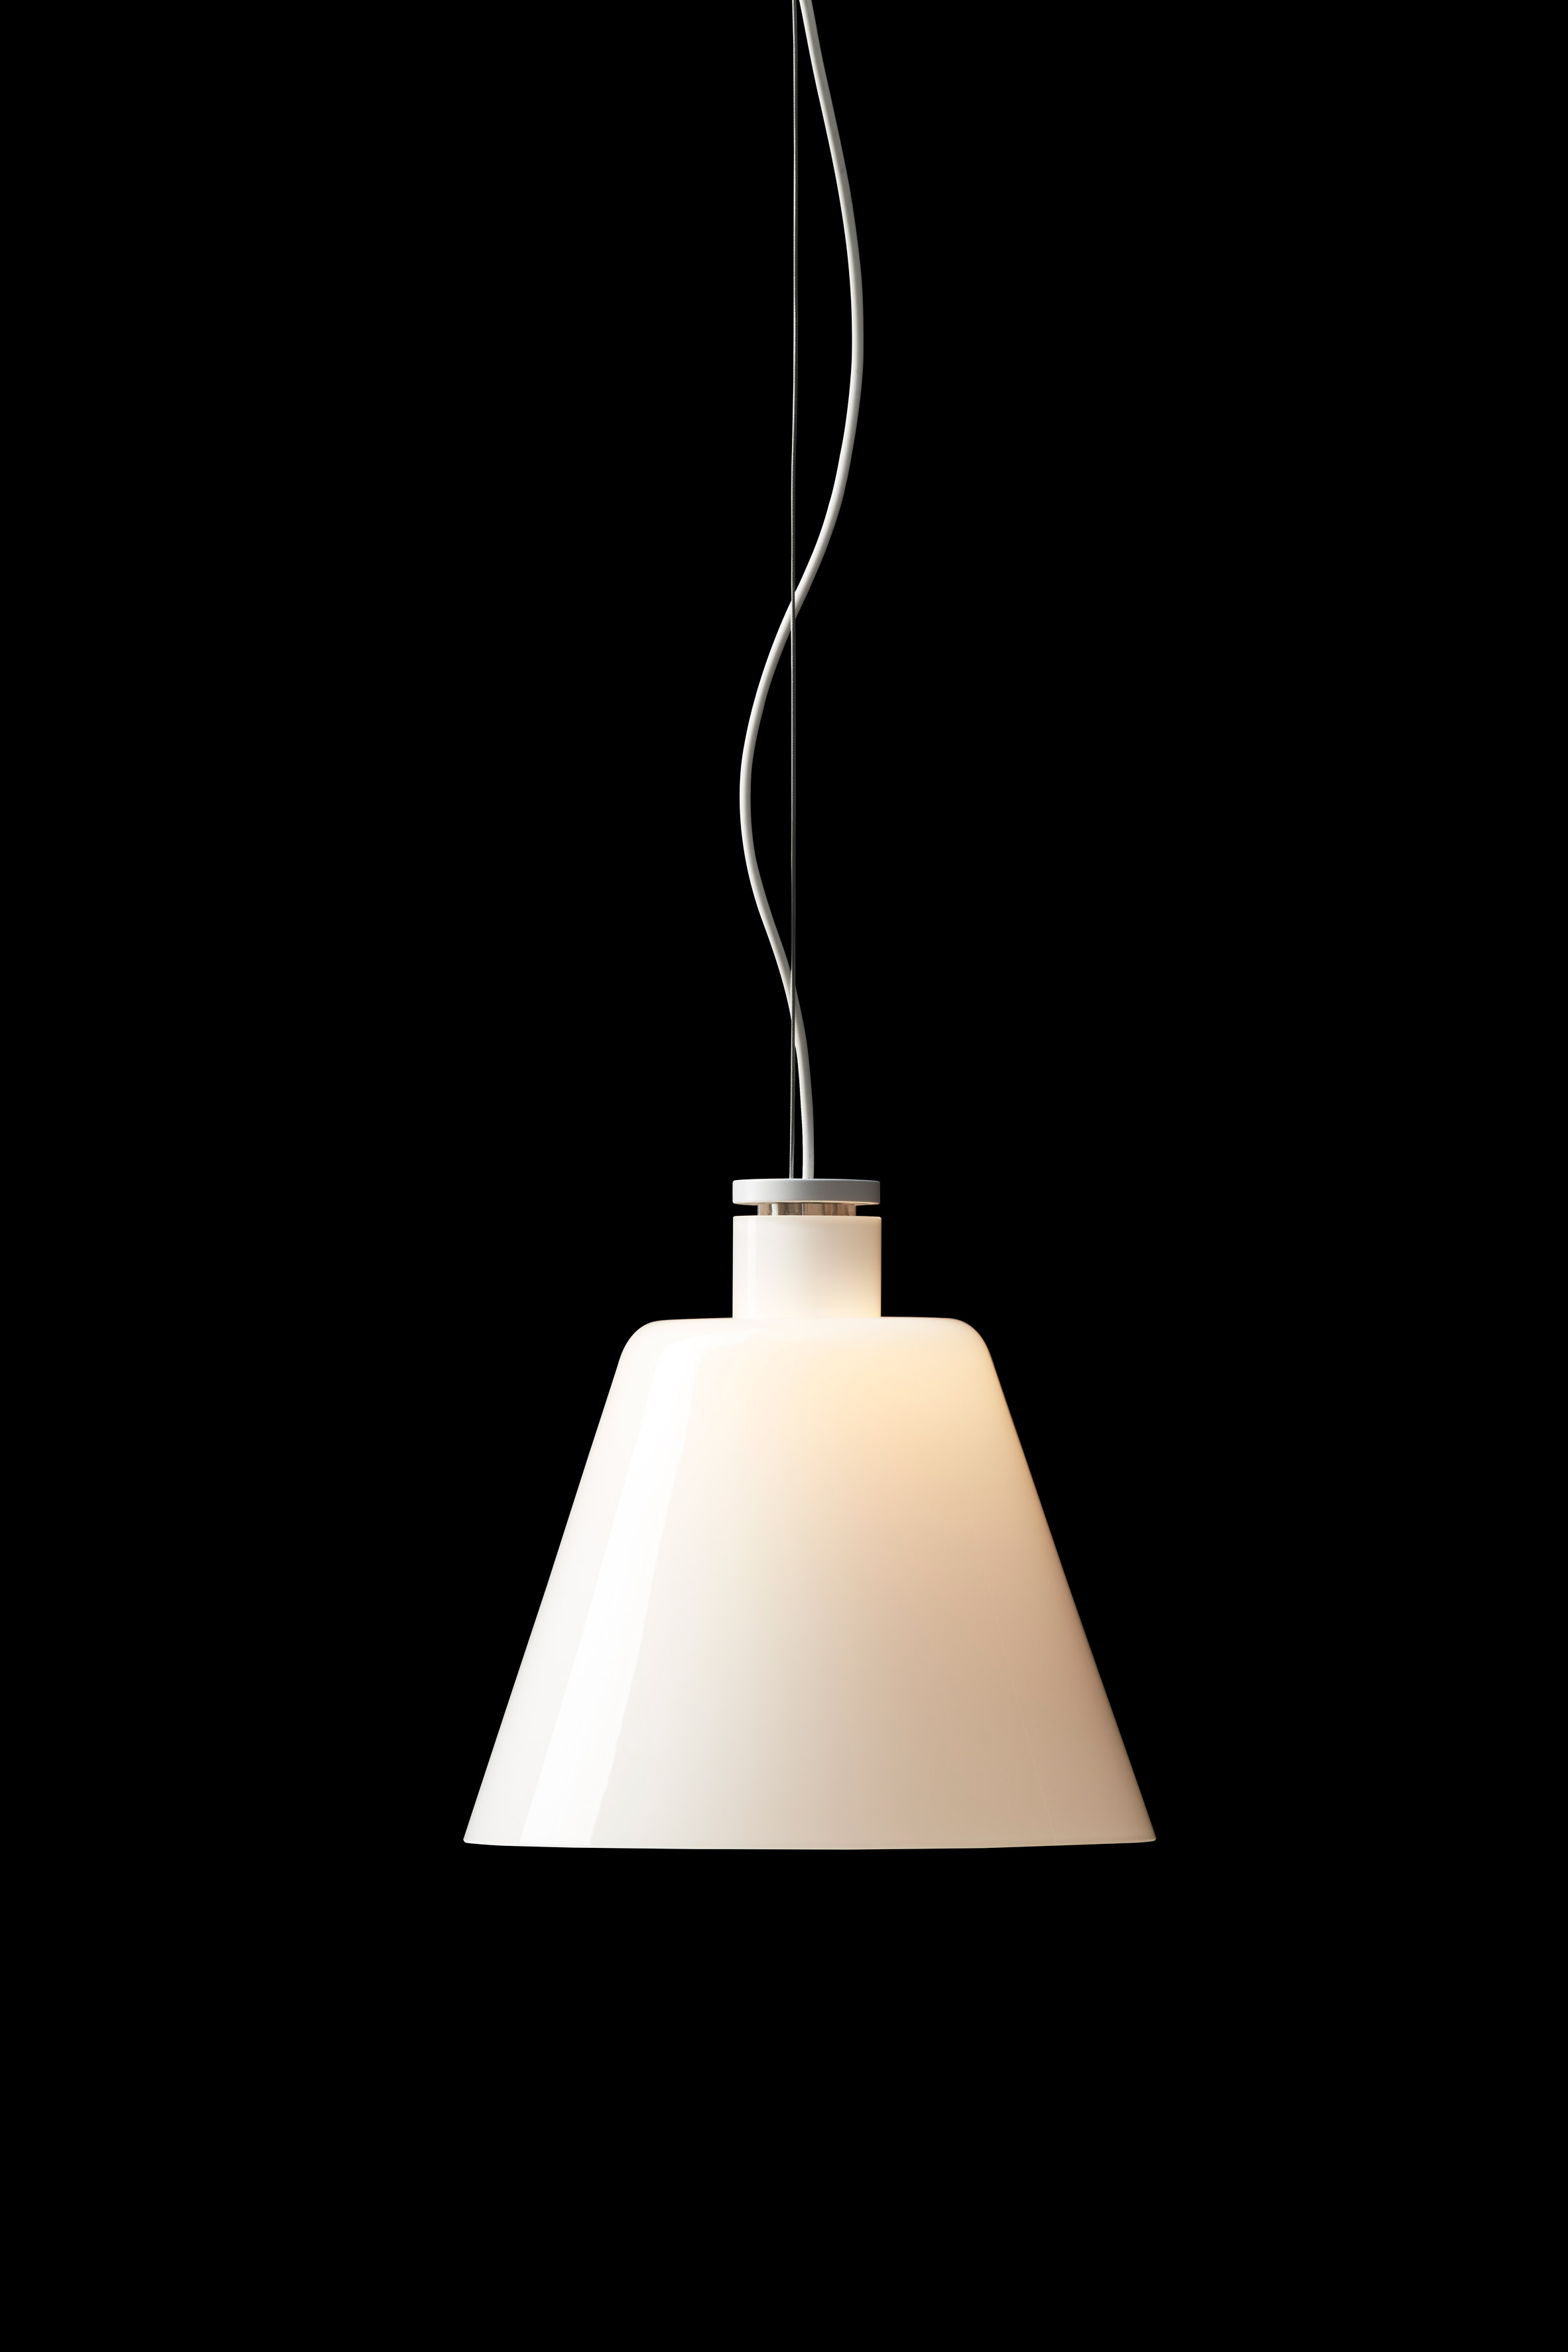 W202 Halo pendant lamp family by architect David Chipperfield for Wästberg